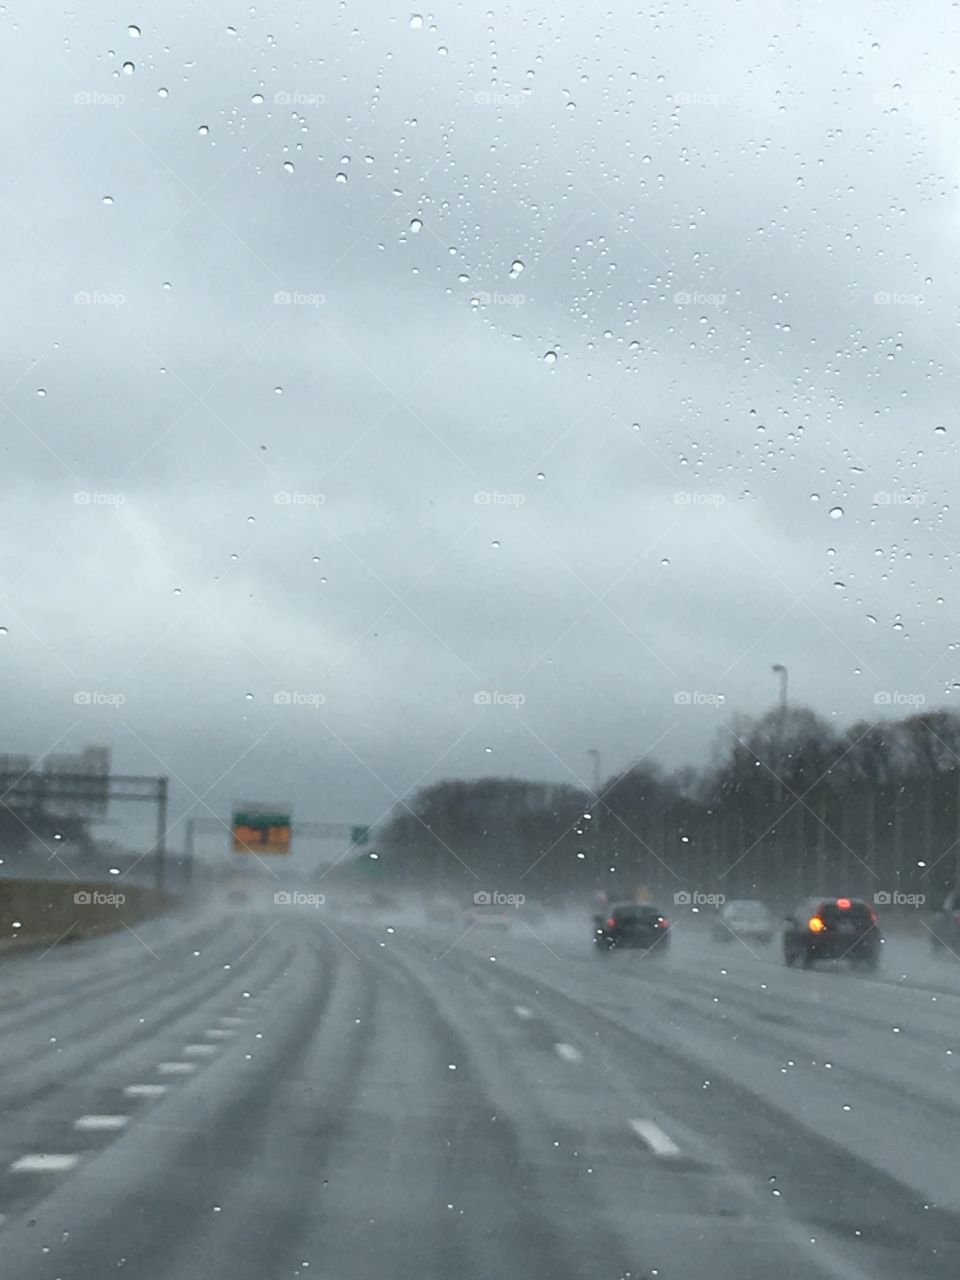 Riding in the storm